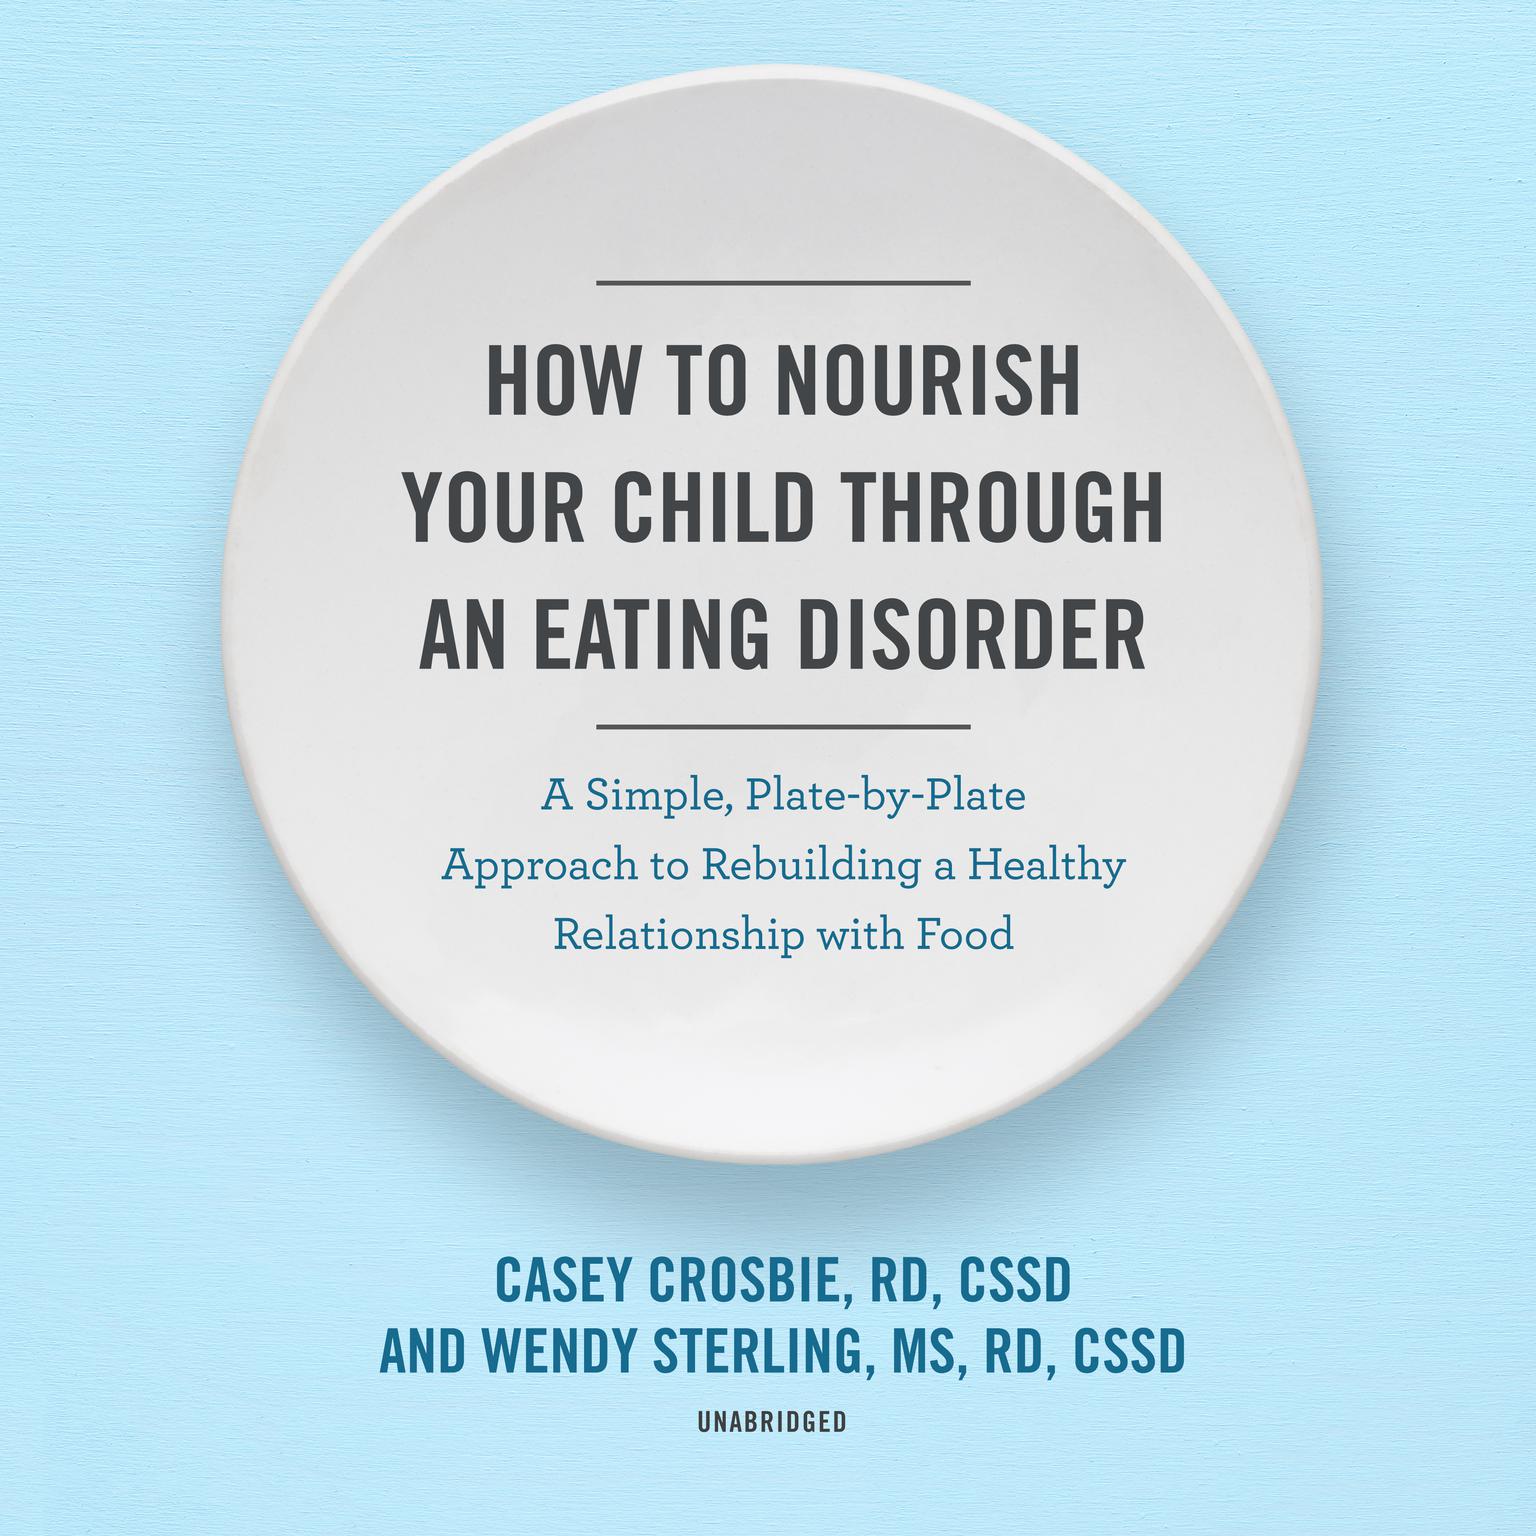 How to Nourish Your Child through an Eating Disorder: A Simple, Plate-by-Plate Approach to Rebuilding a Healthy Relationship with Food Audiobook, by Casey Crosbie